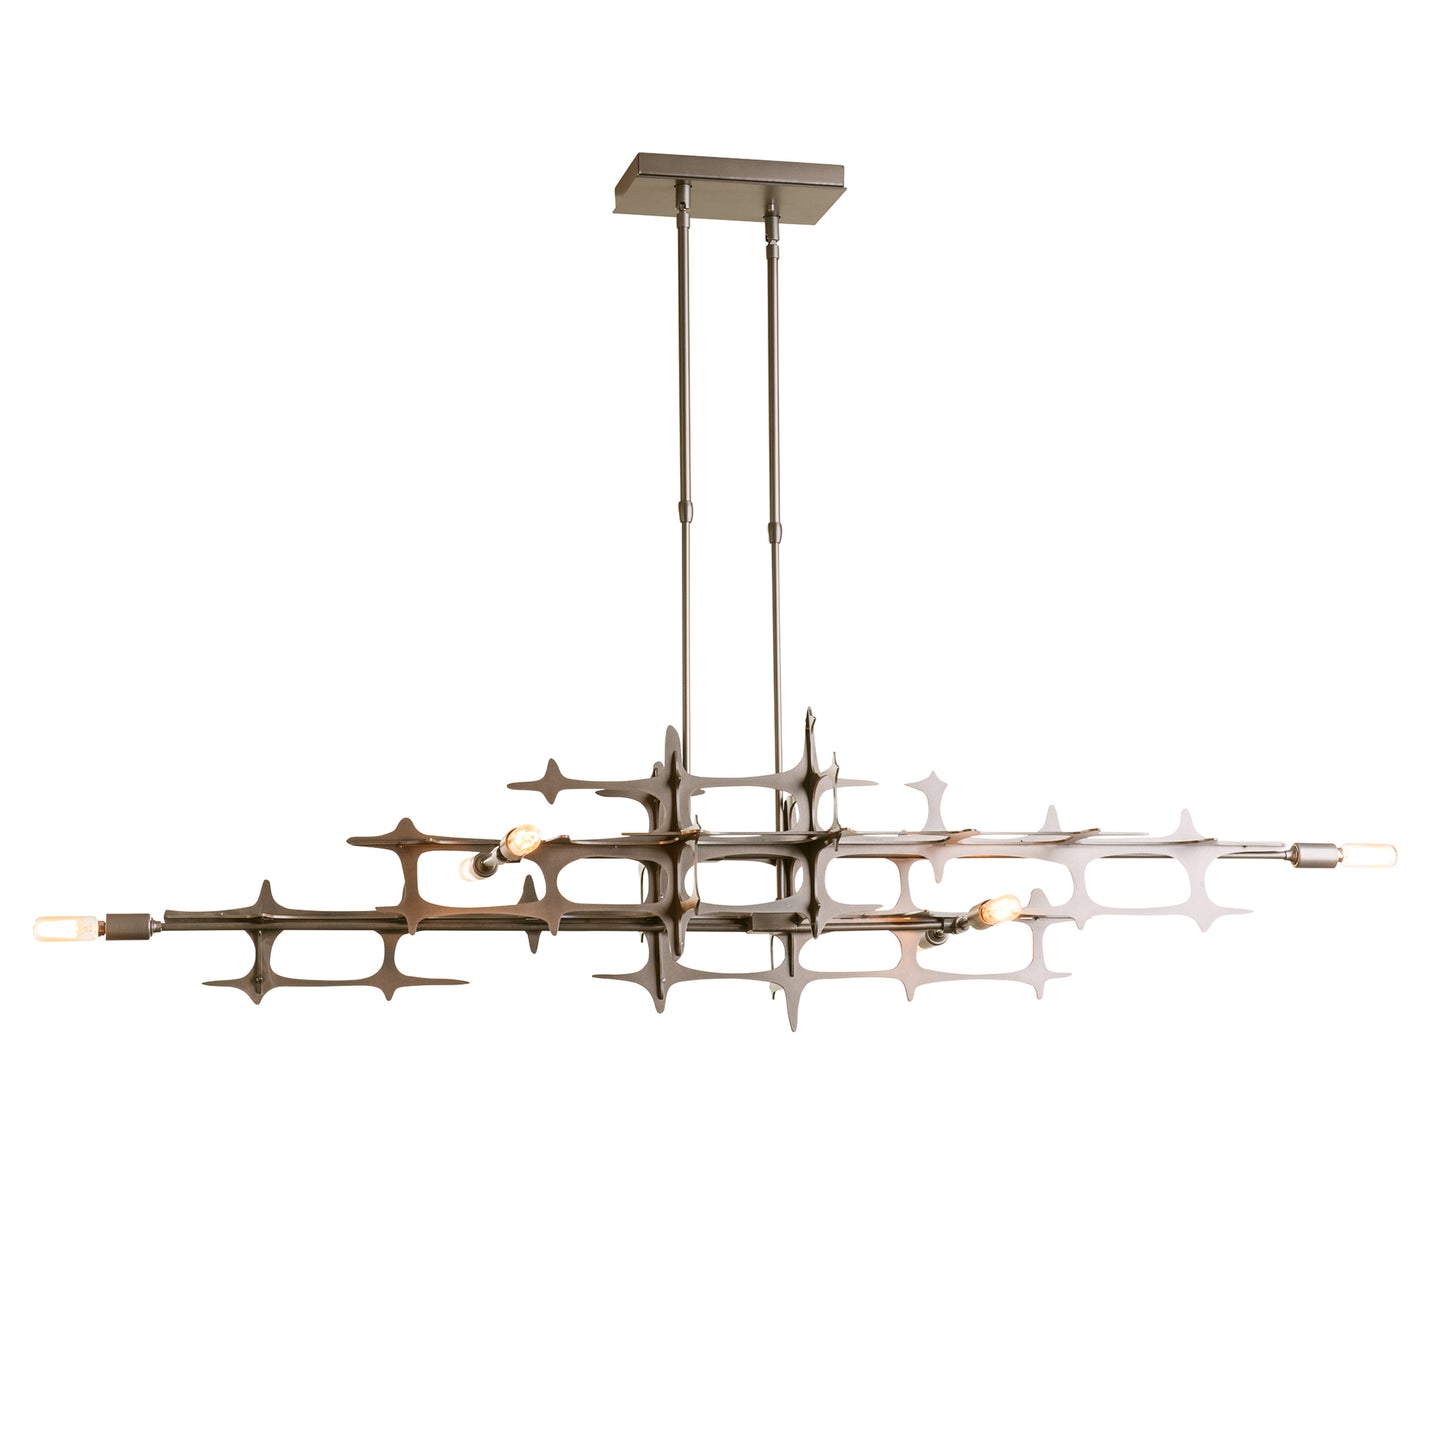 An industrial design Grid Pendant with metal rods hanging from it, the perfect addition to any space.